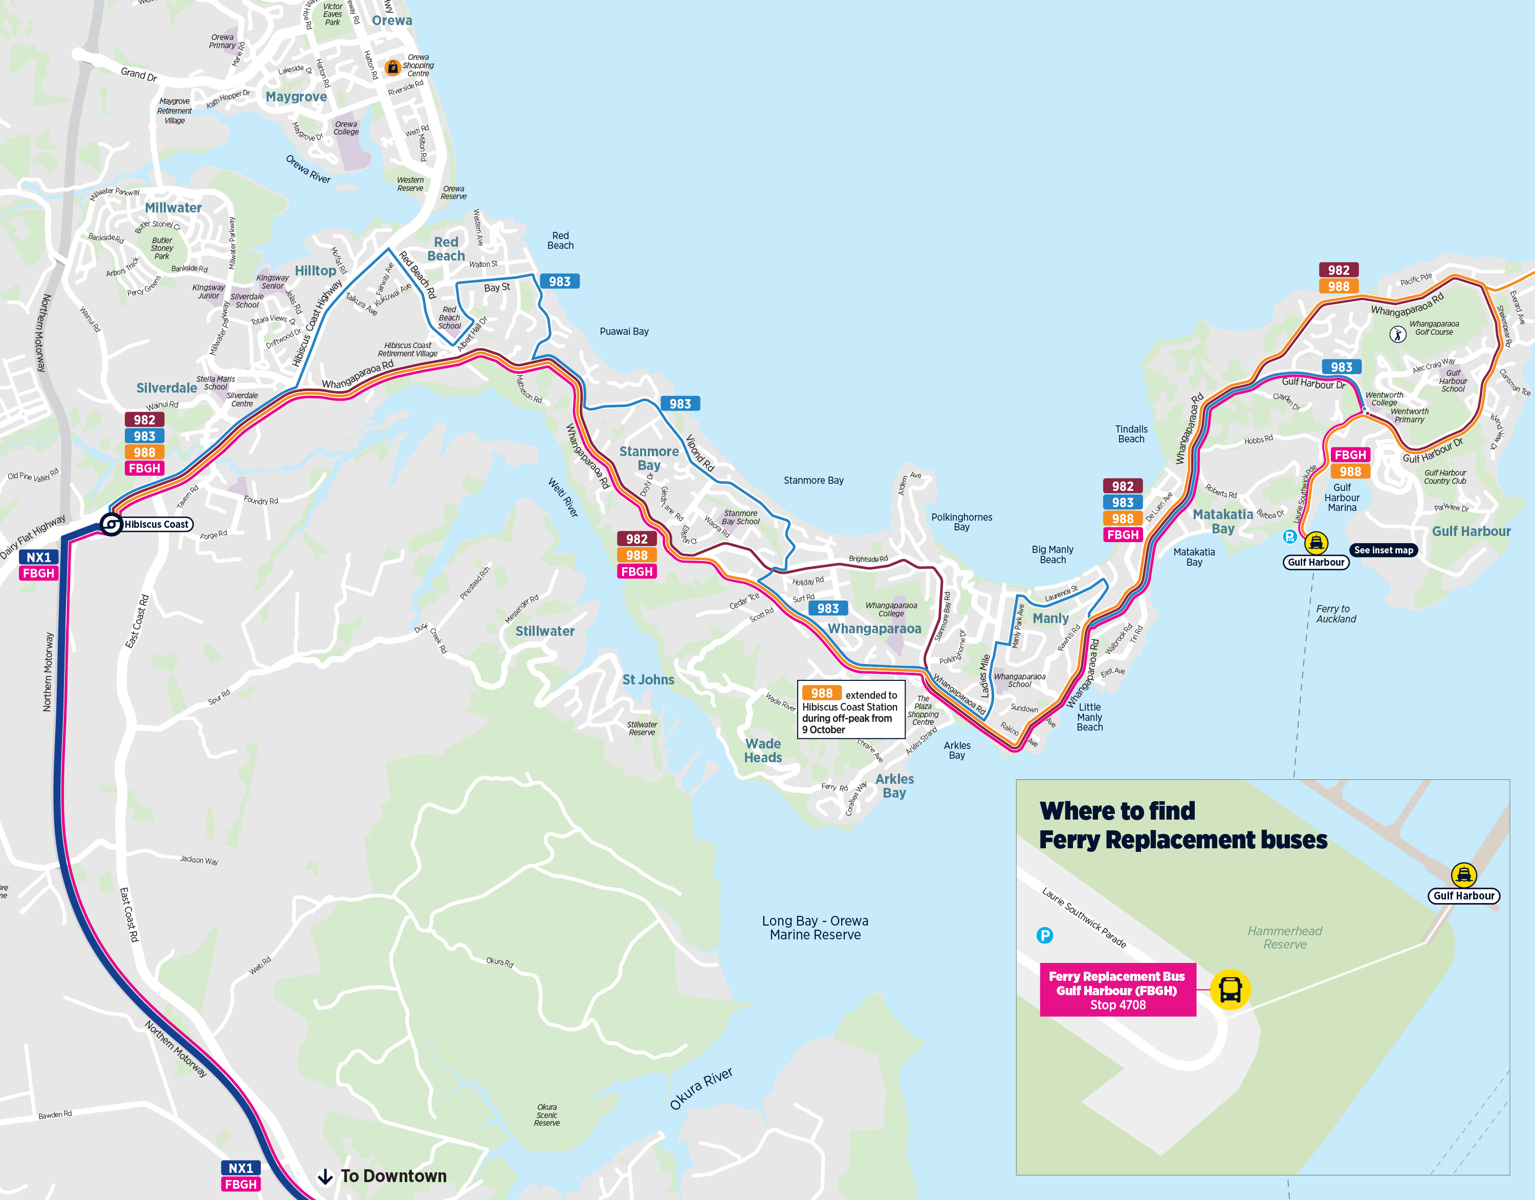 Map showing the ferry replacement bus routes available for the Gulf Harbour ferry.